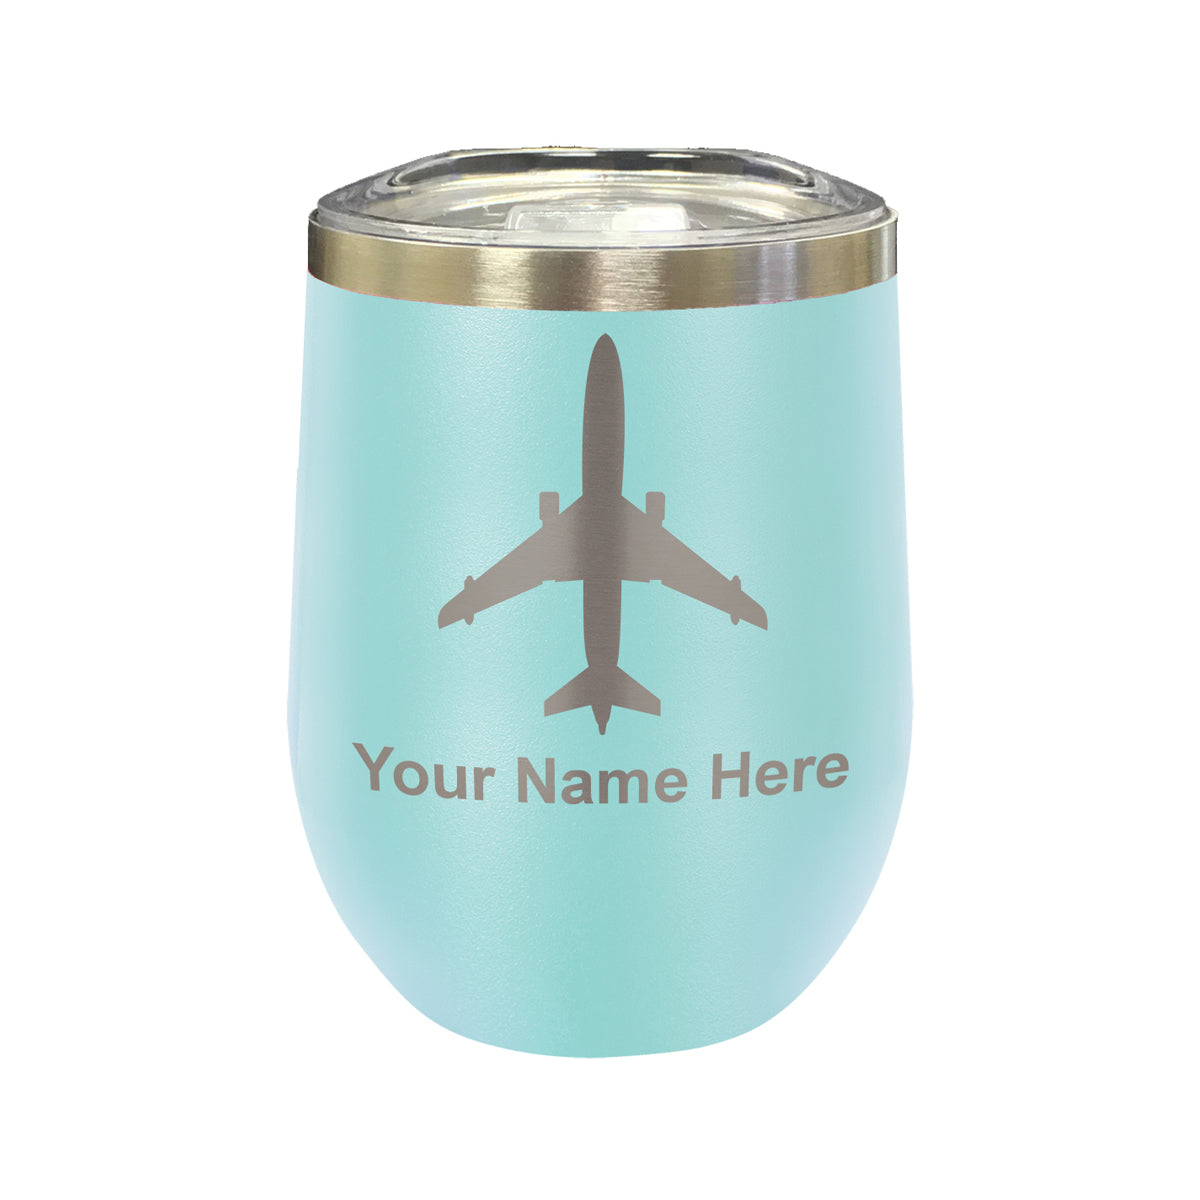 LaserGram Double Wall Stainless Steel Wine Glass, Jet Airplane, Personalized Engraving Included